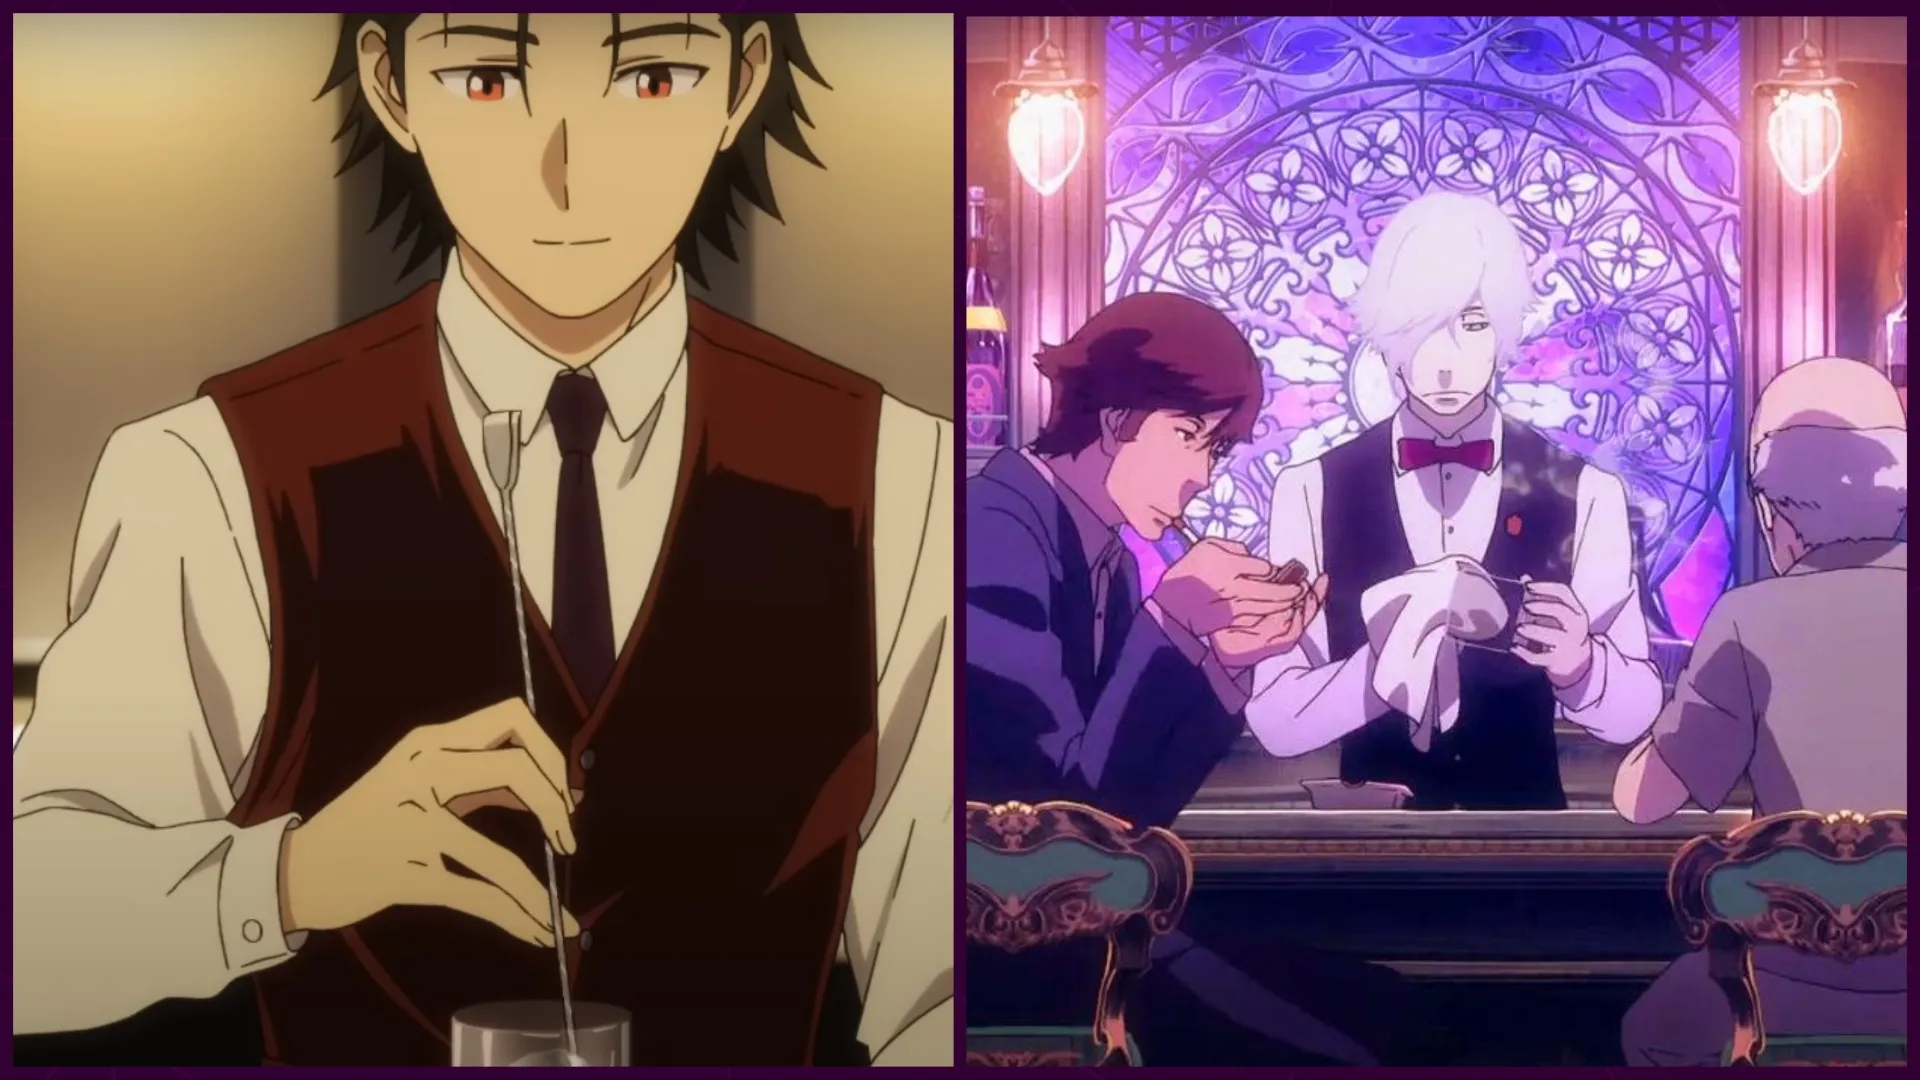 Bartender glass of God Episode 3: Release Date, Expected Plot, where to watch?